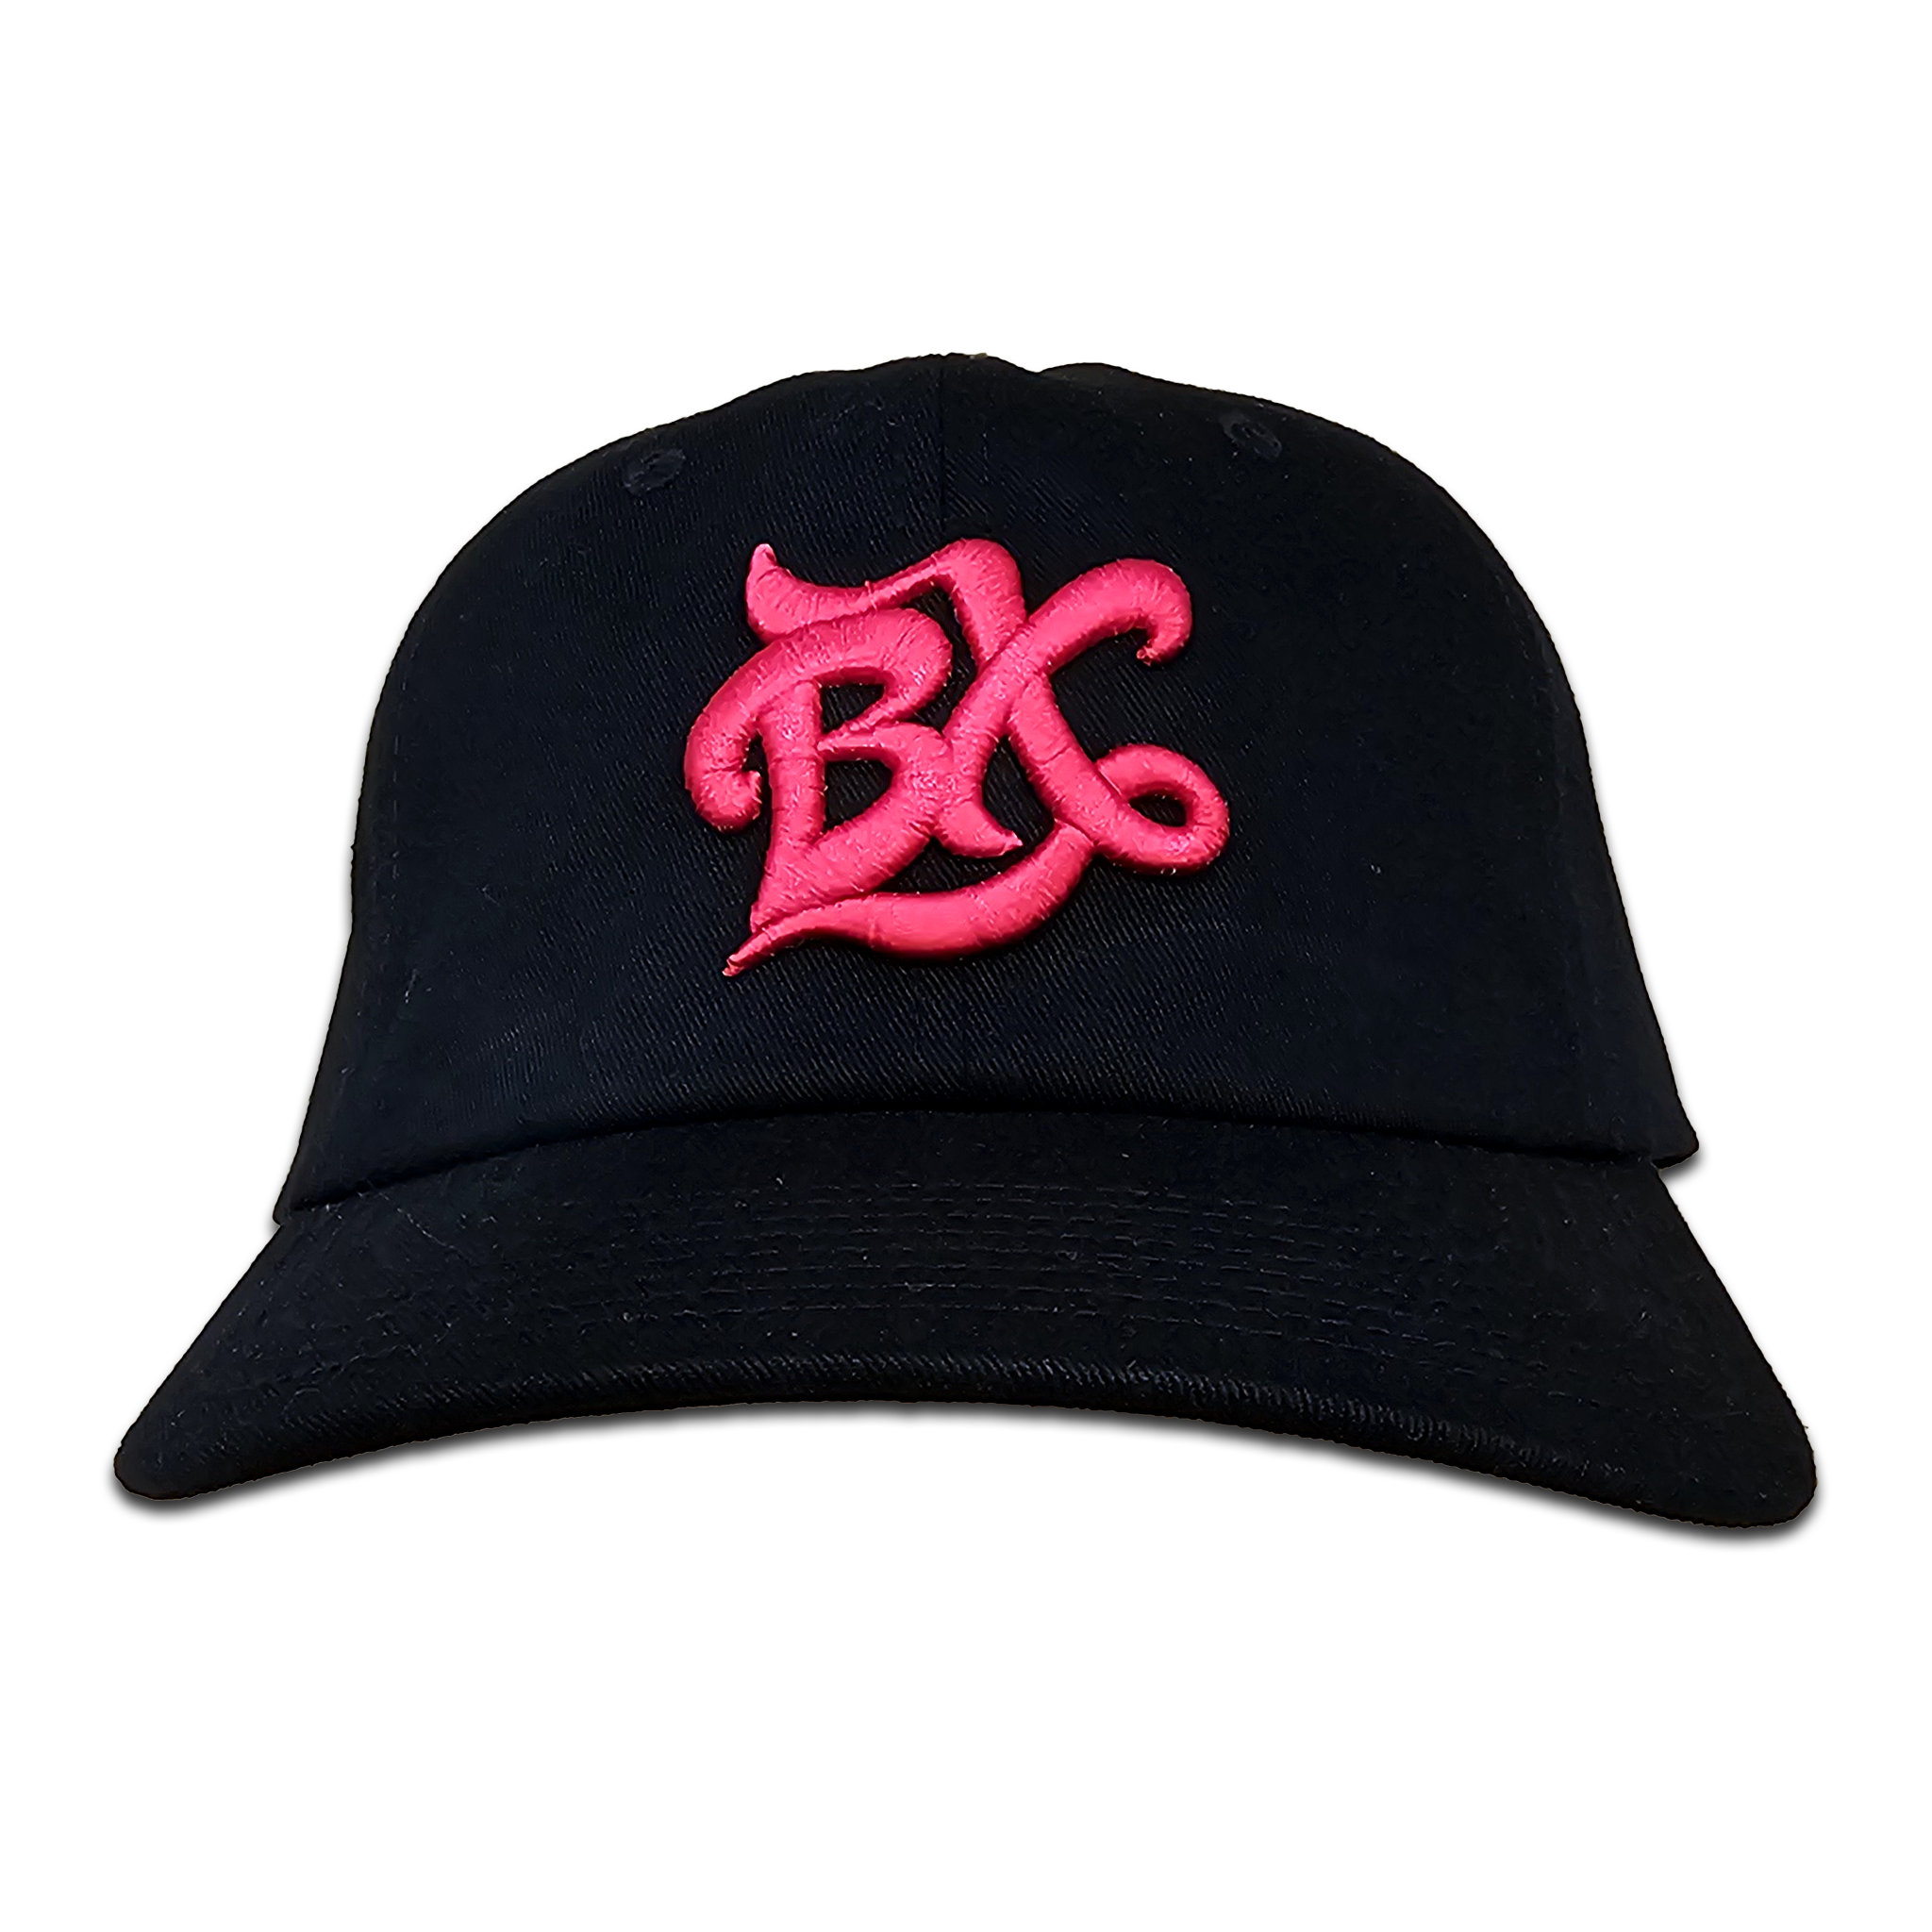 BX Wave Dad Hat in Black/Fuchsia Front